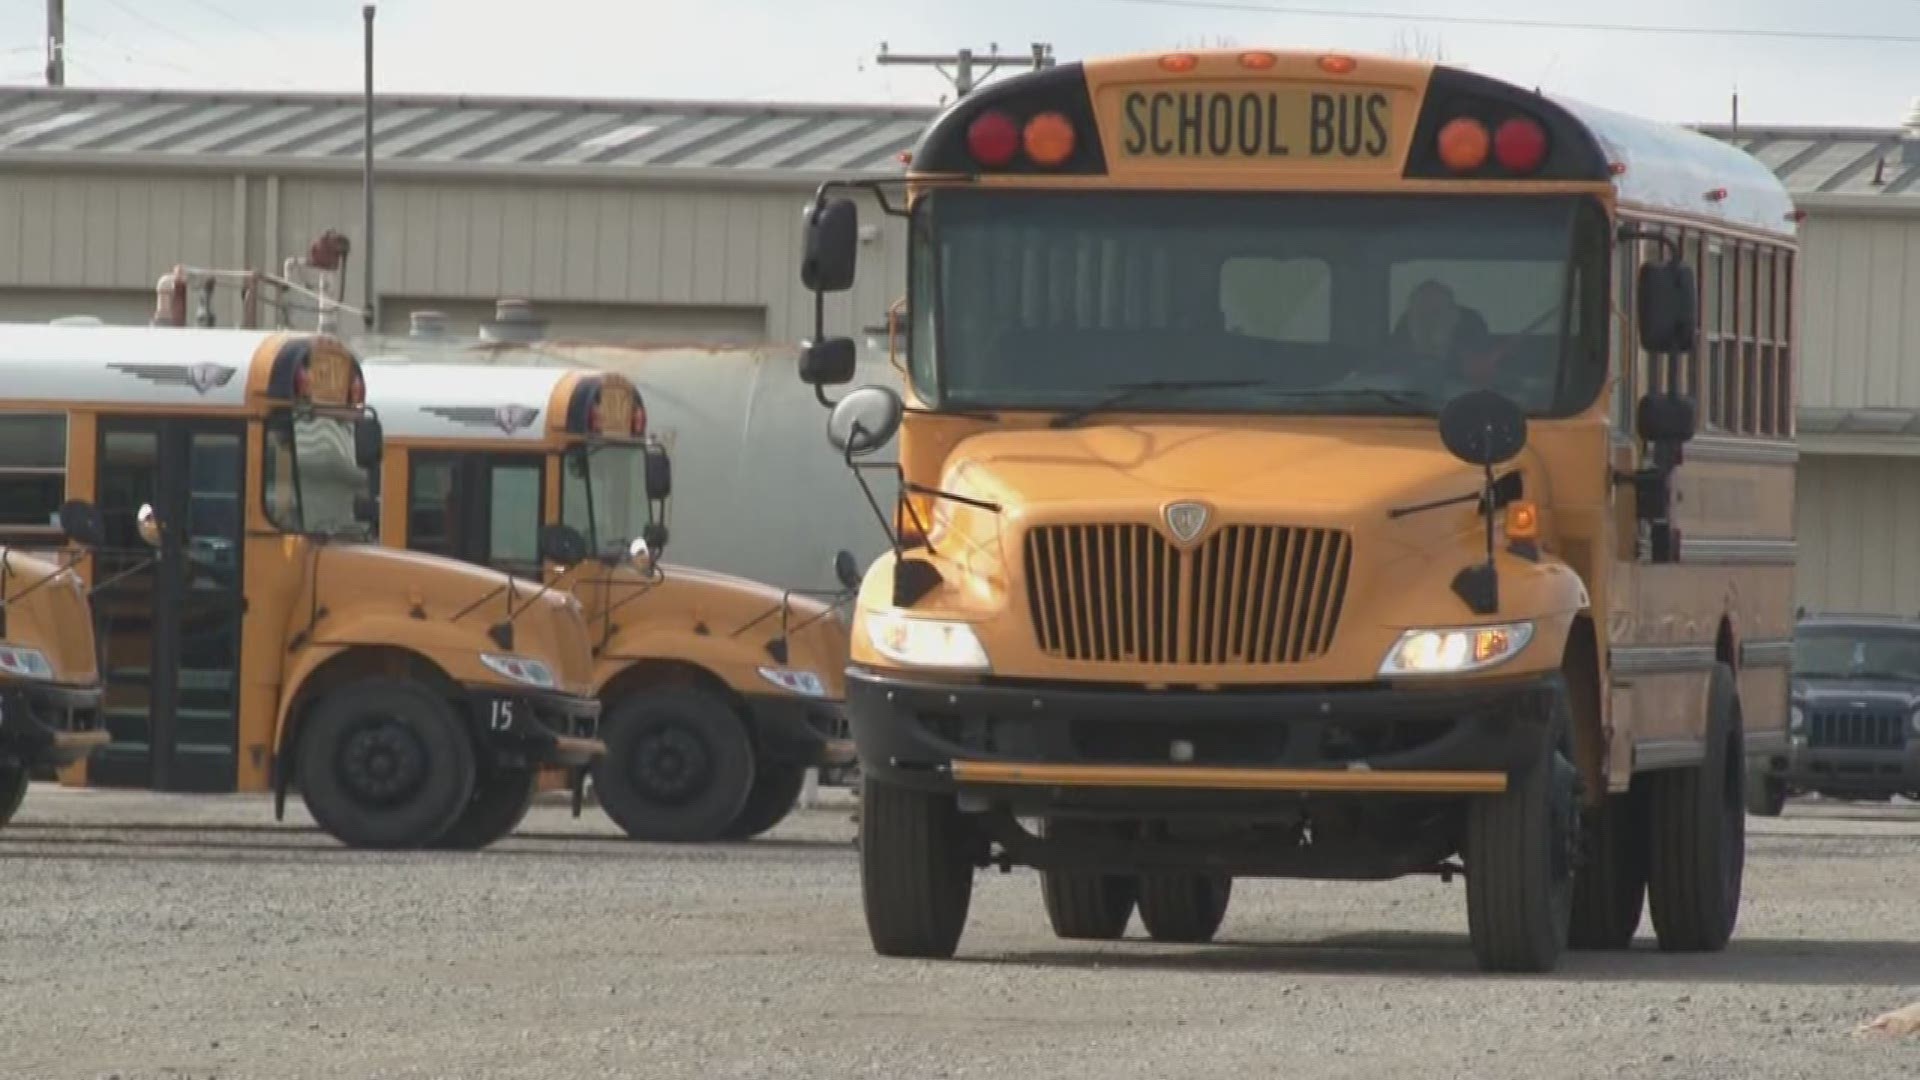 The tracker debuted Tues, Feb. 6, allowing parents to monitor their children's school buses.